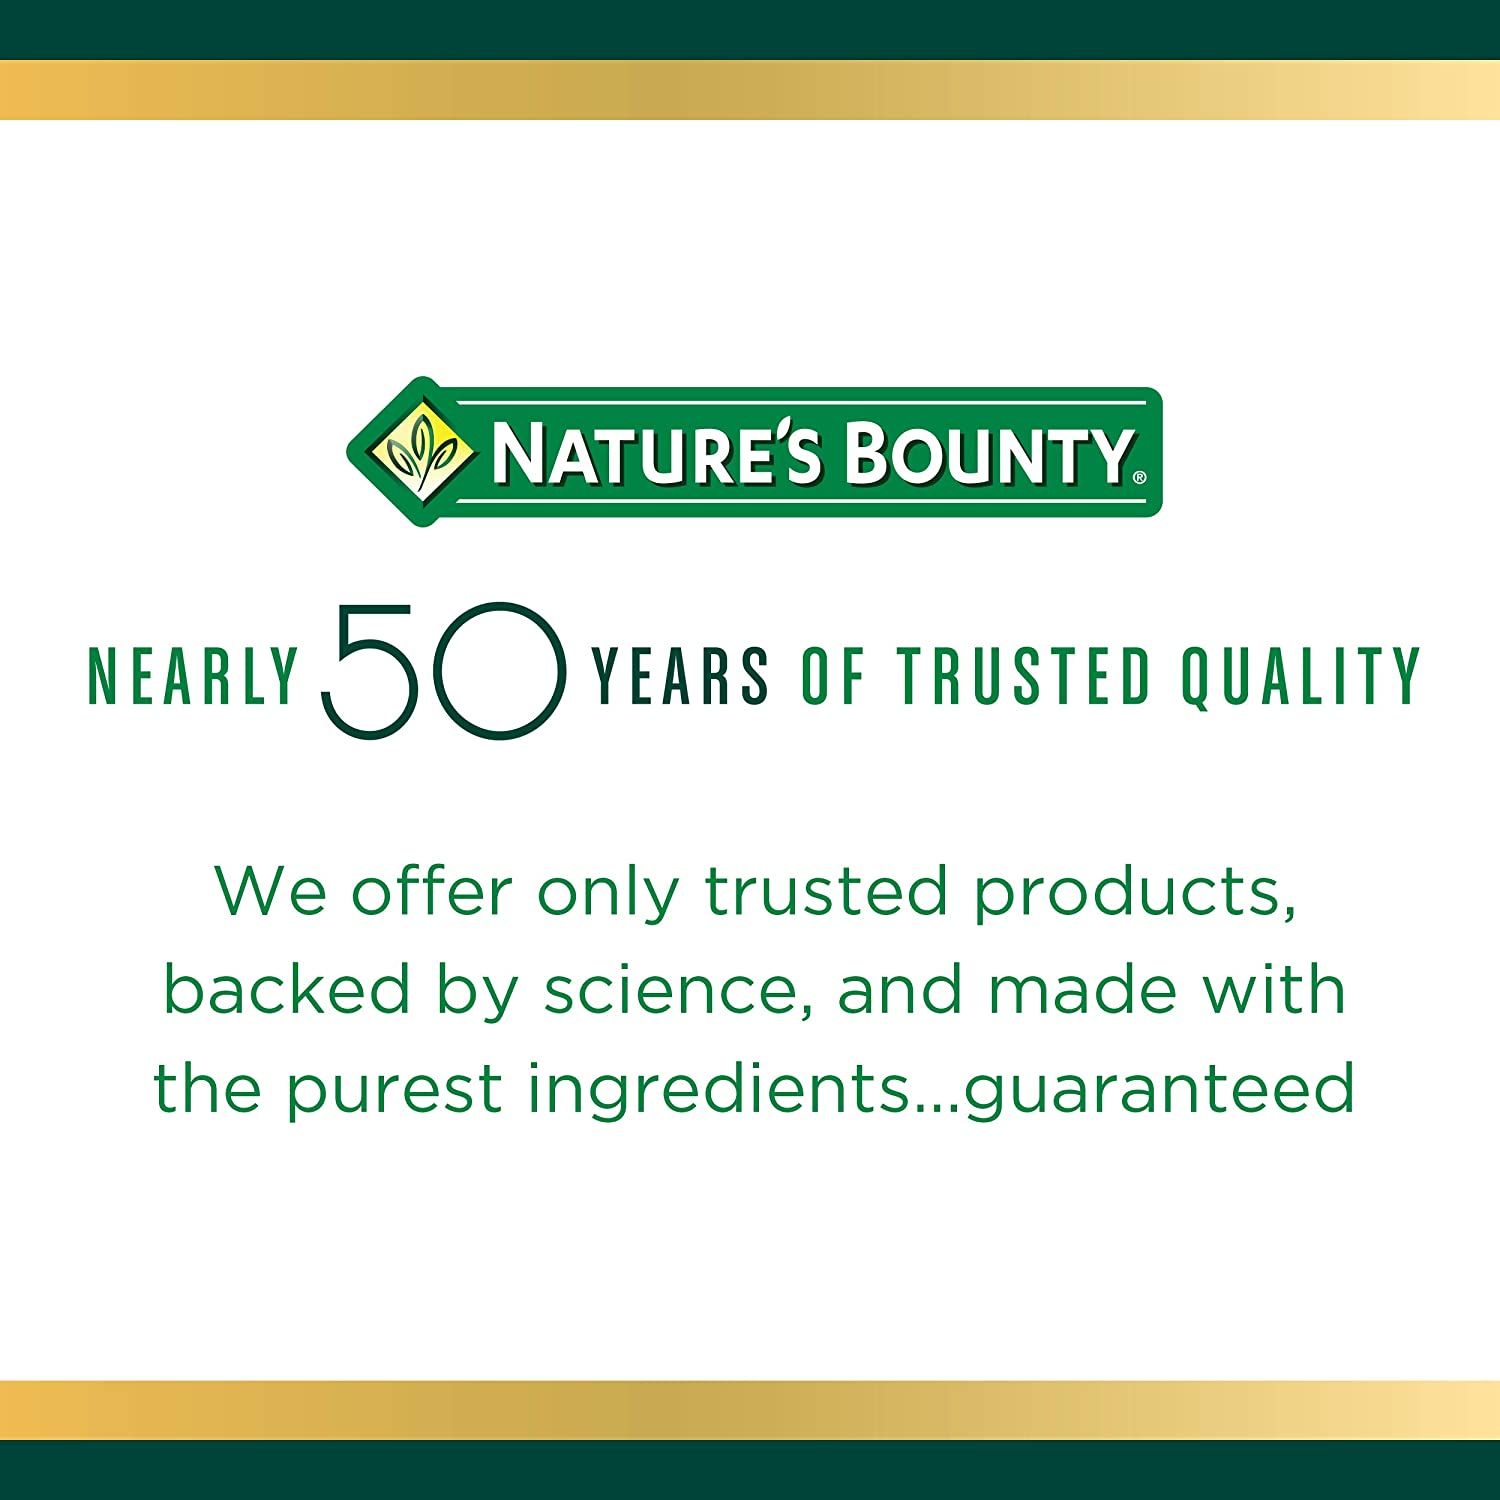 Nature's Bounty Controlled Delivery Probiotic CD Caplets - 30 ct